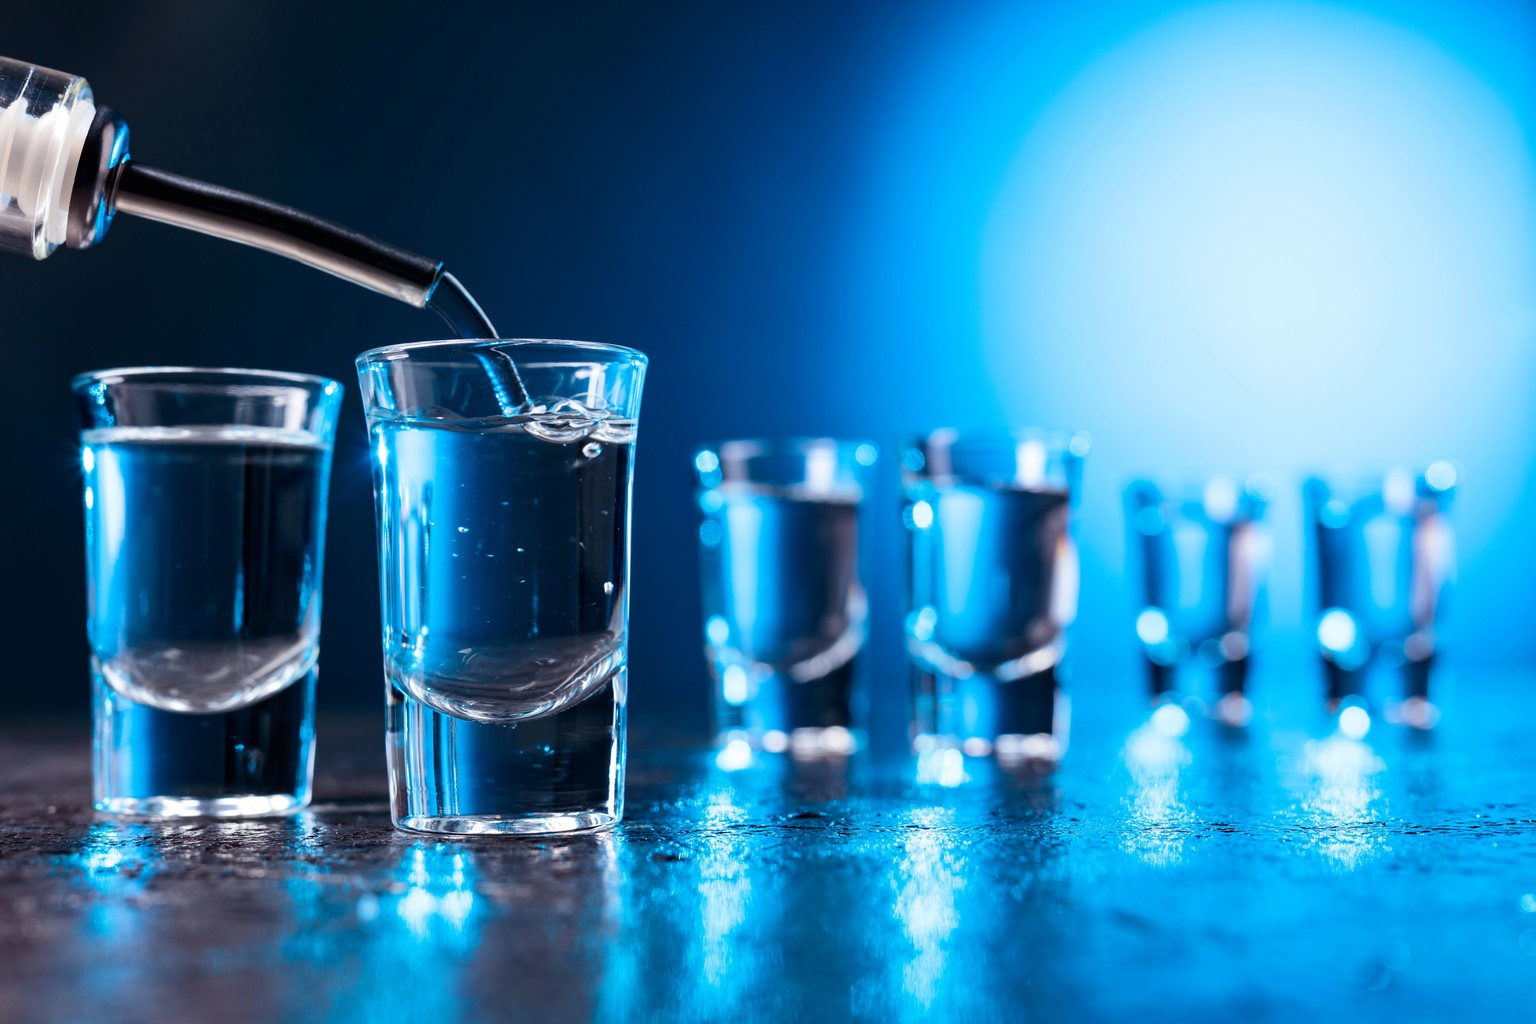 Vodka poured into a glass lit with blue backlight. Copy space.